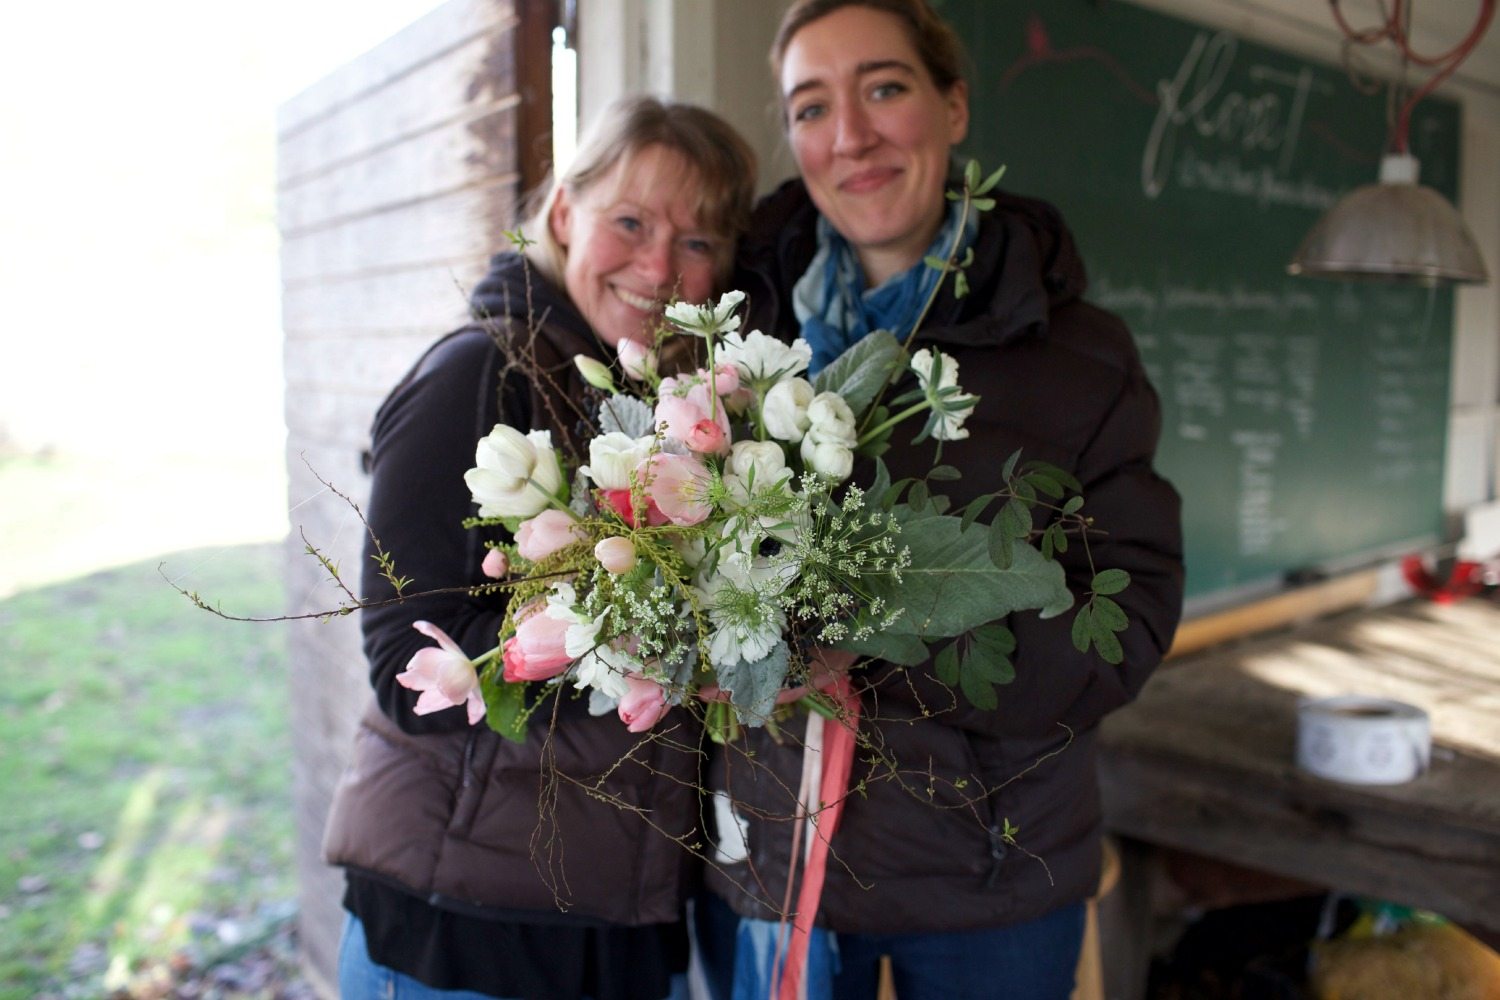 Two women holding a bouquet